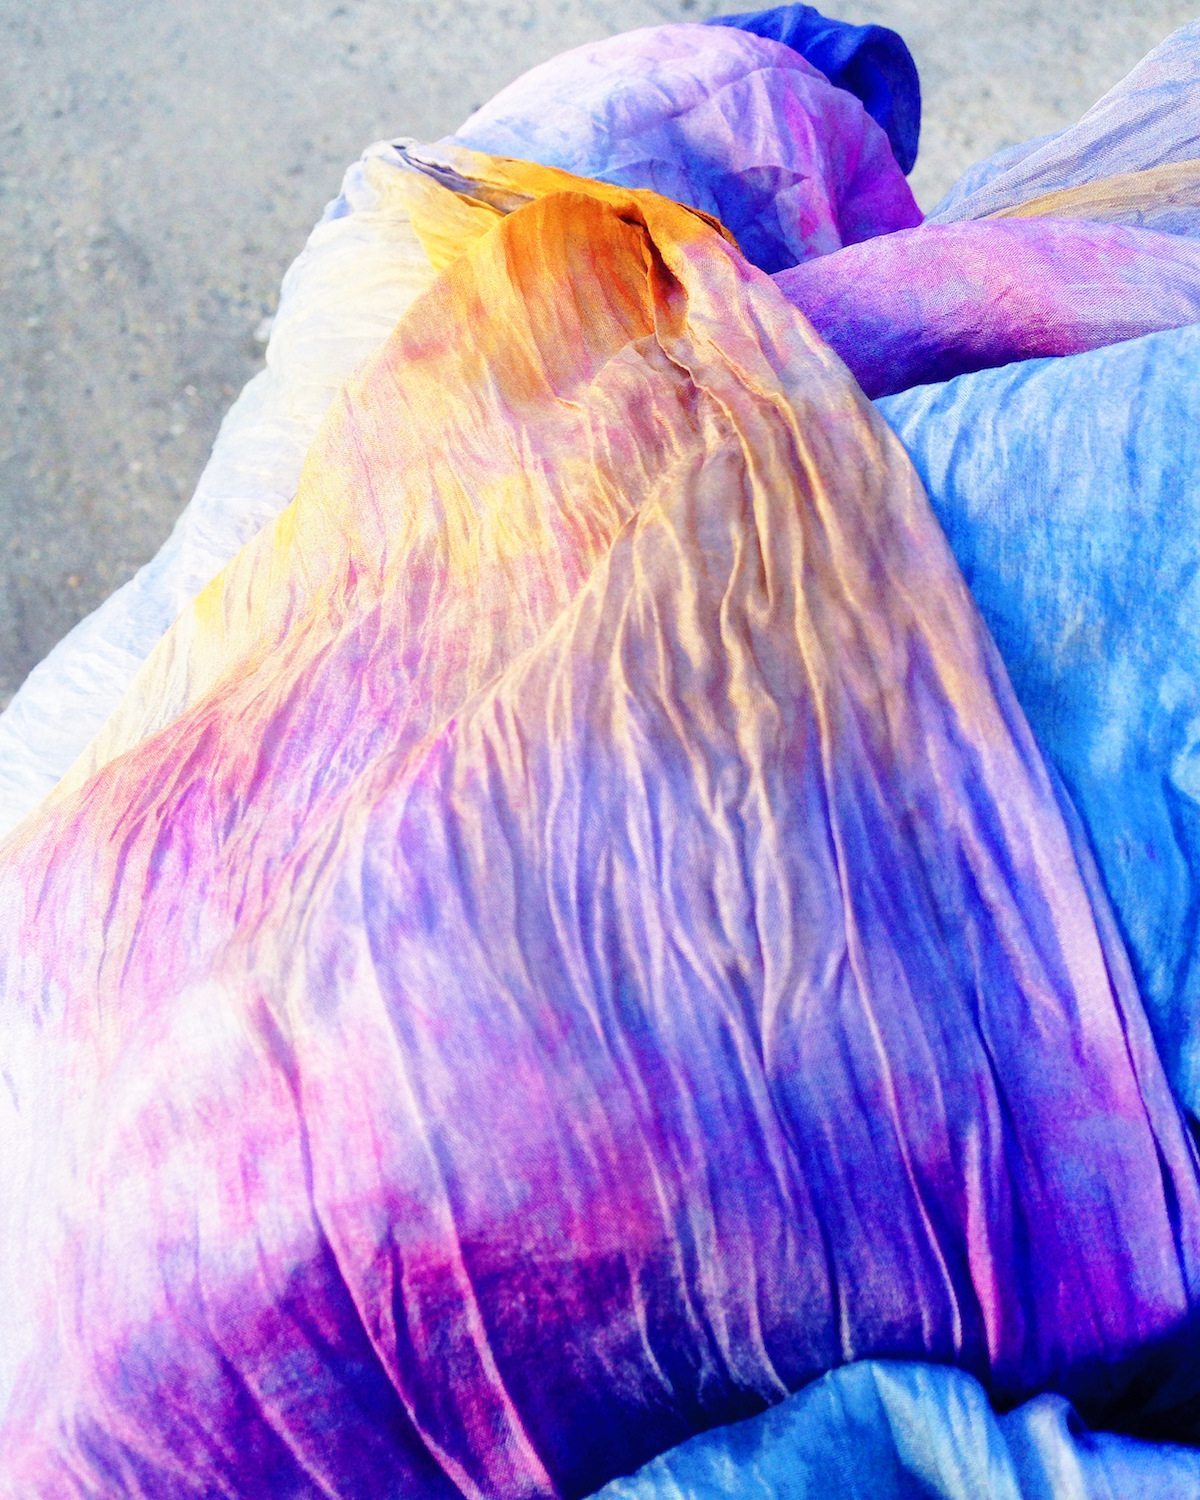 How to Breathe New Life into Old Clothes with Dye